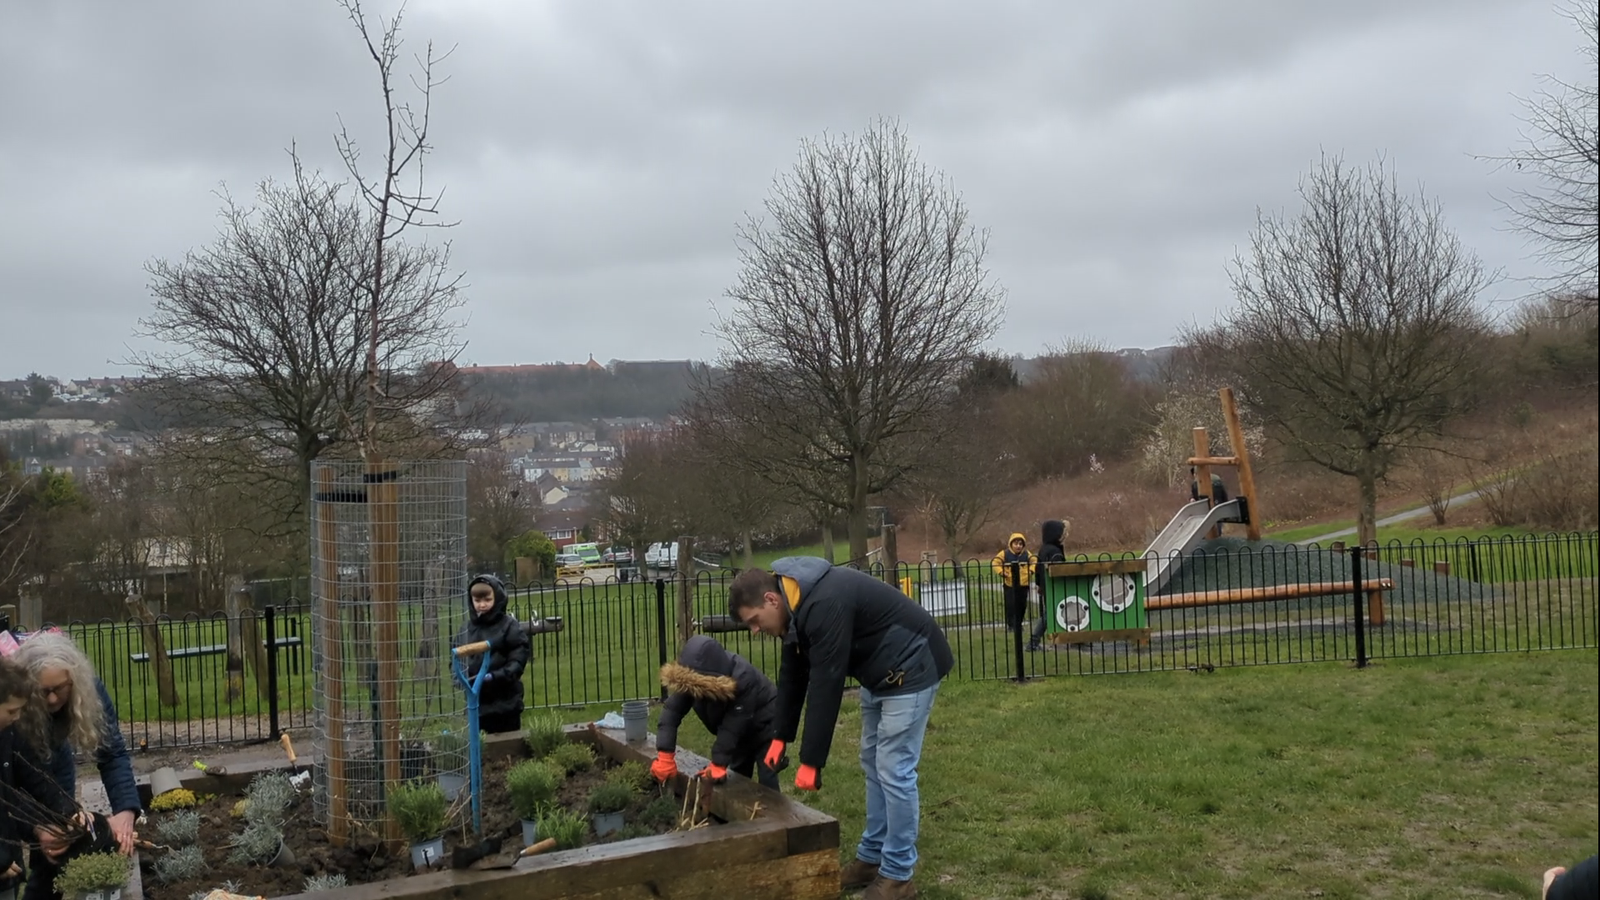 A picture of people planting plants in a shrub bed. More play equipment can be seen in the background, including a slide and balance beam.